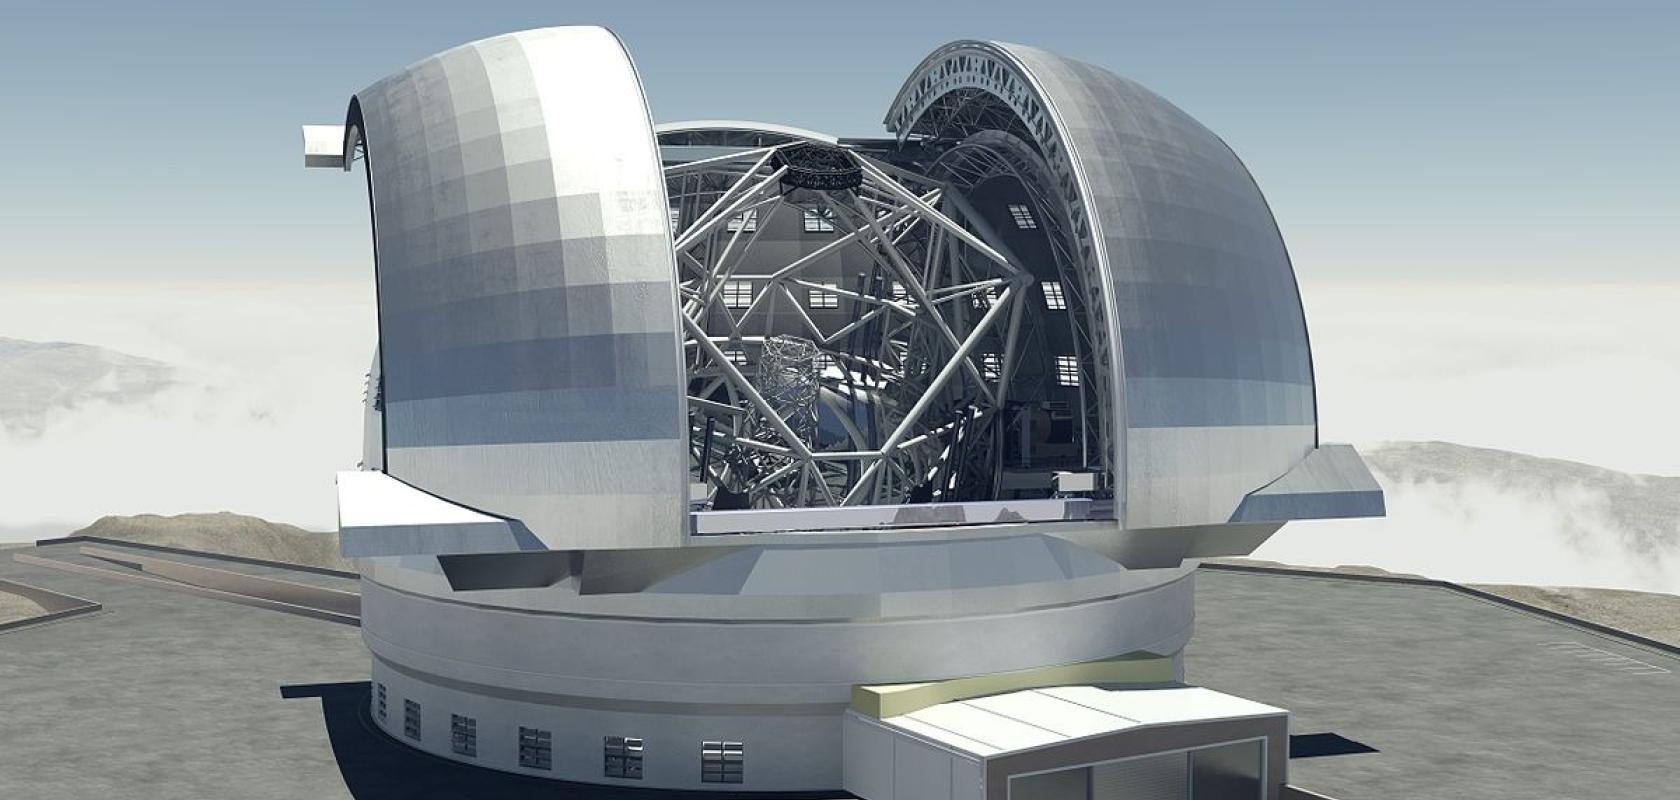 Development of the extremely large telescope in Chile is being backed with fresh funding (Image: Wikipedia)